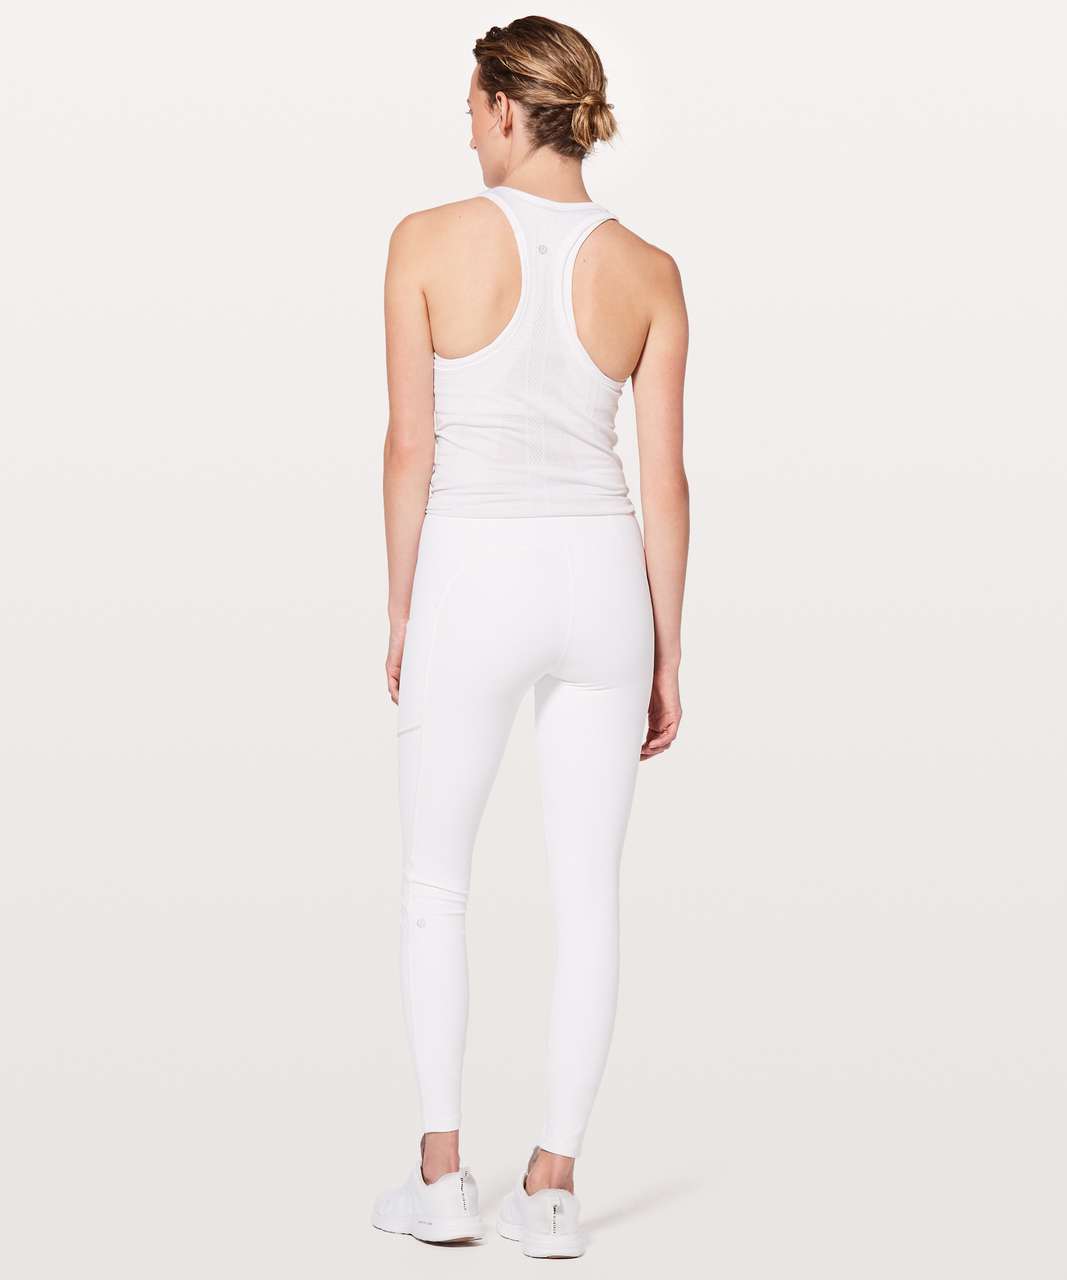 Lululemon Speed Up Tight *28" - White (First Release)